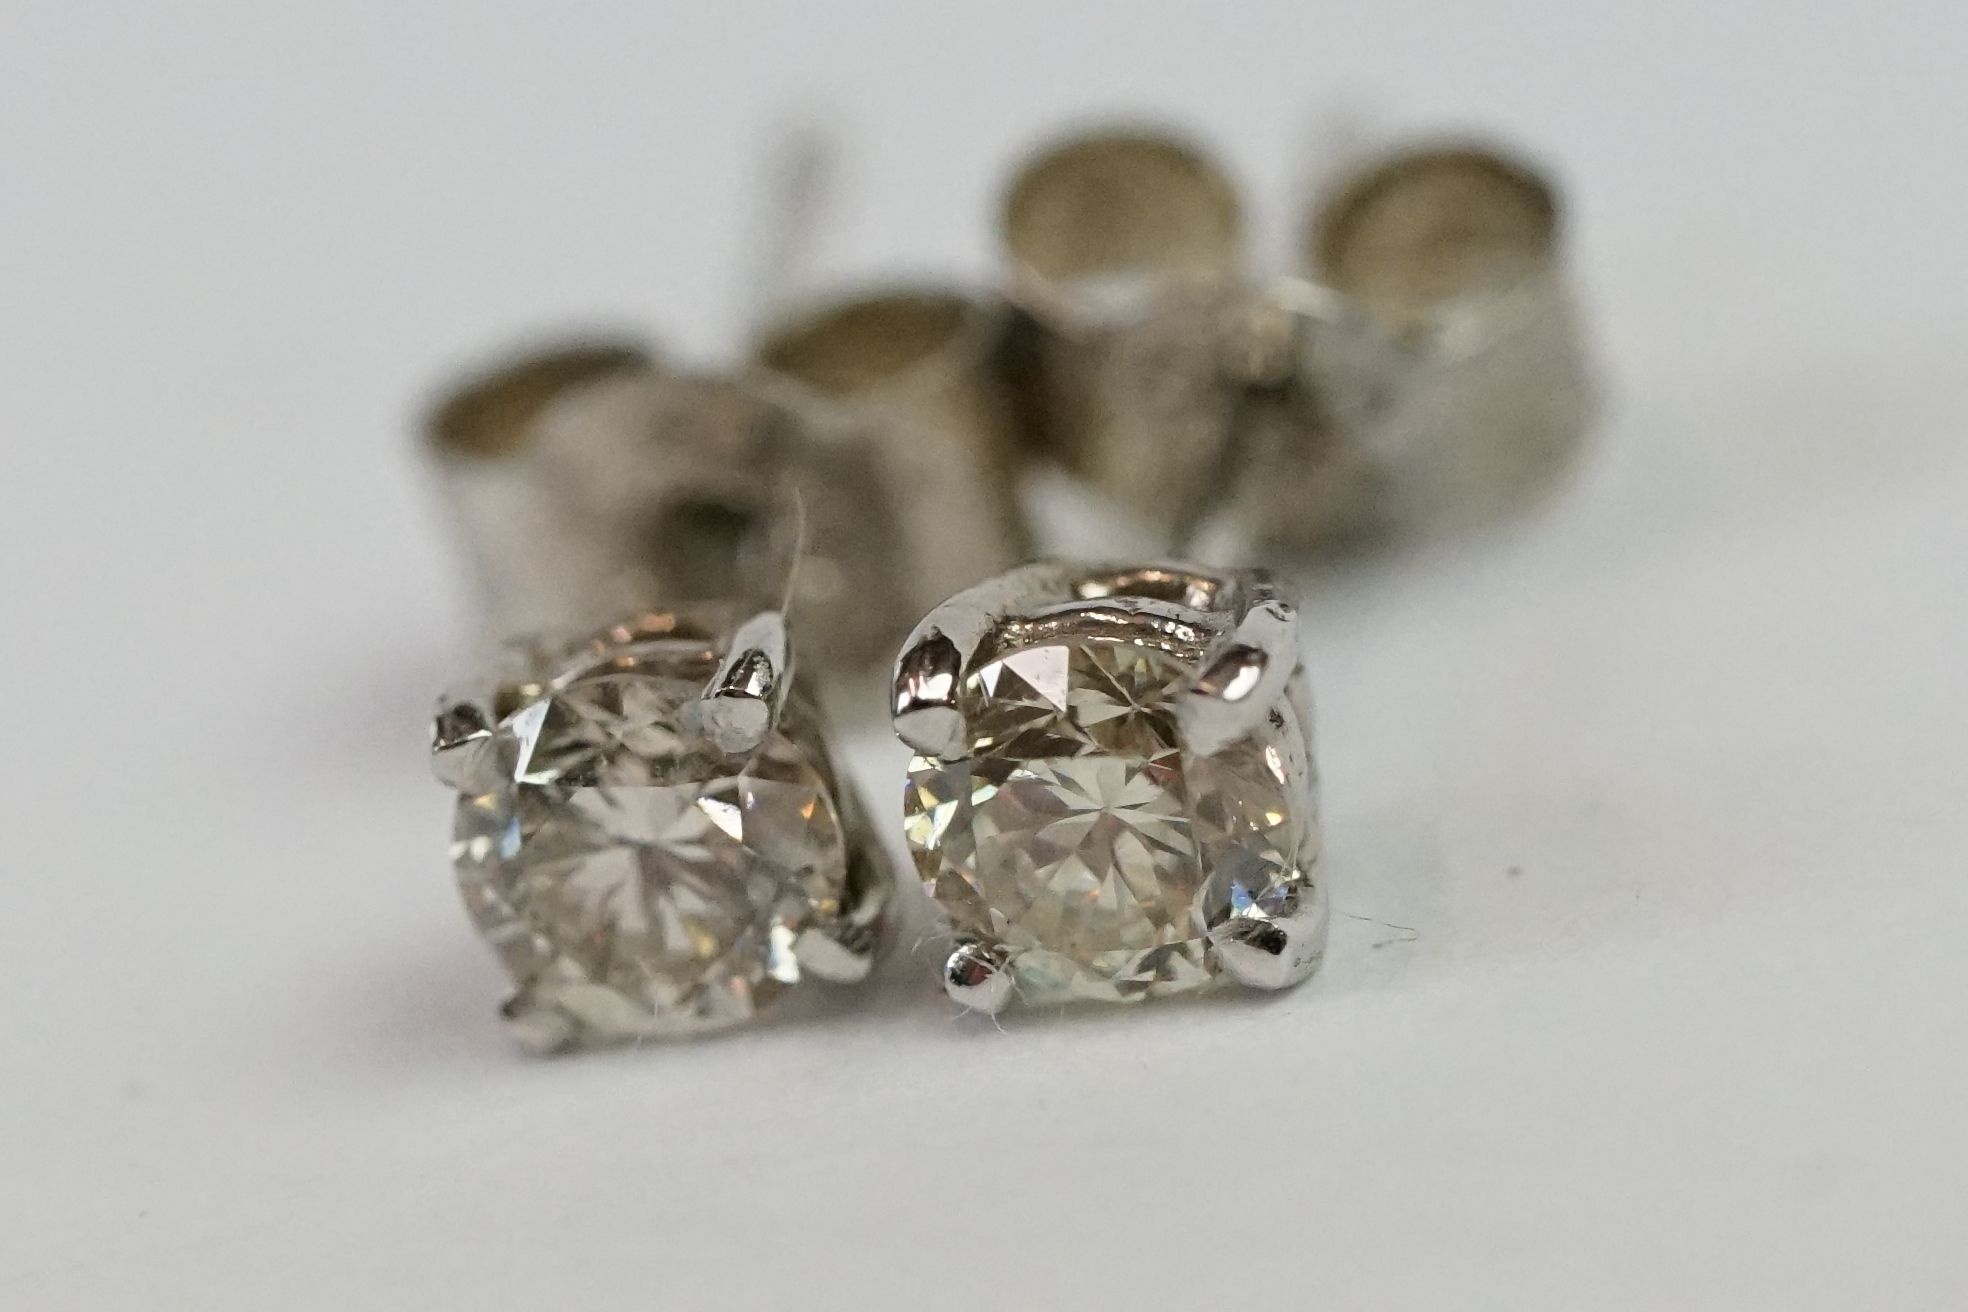 Pair of 14ct White Gold Diamond Stud Earrings of 30 points approx. total - Image 6 of 10